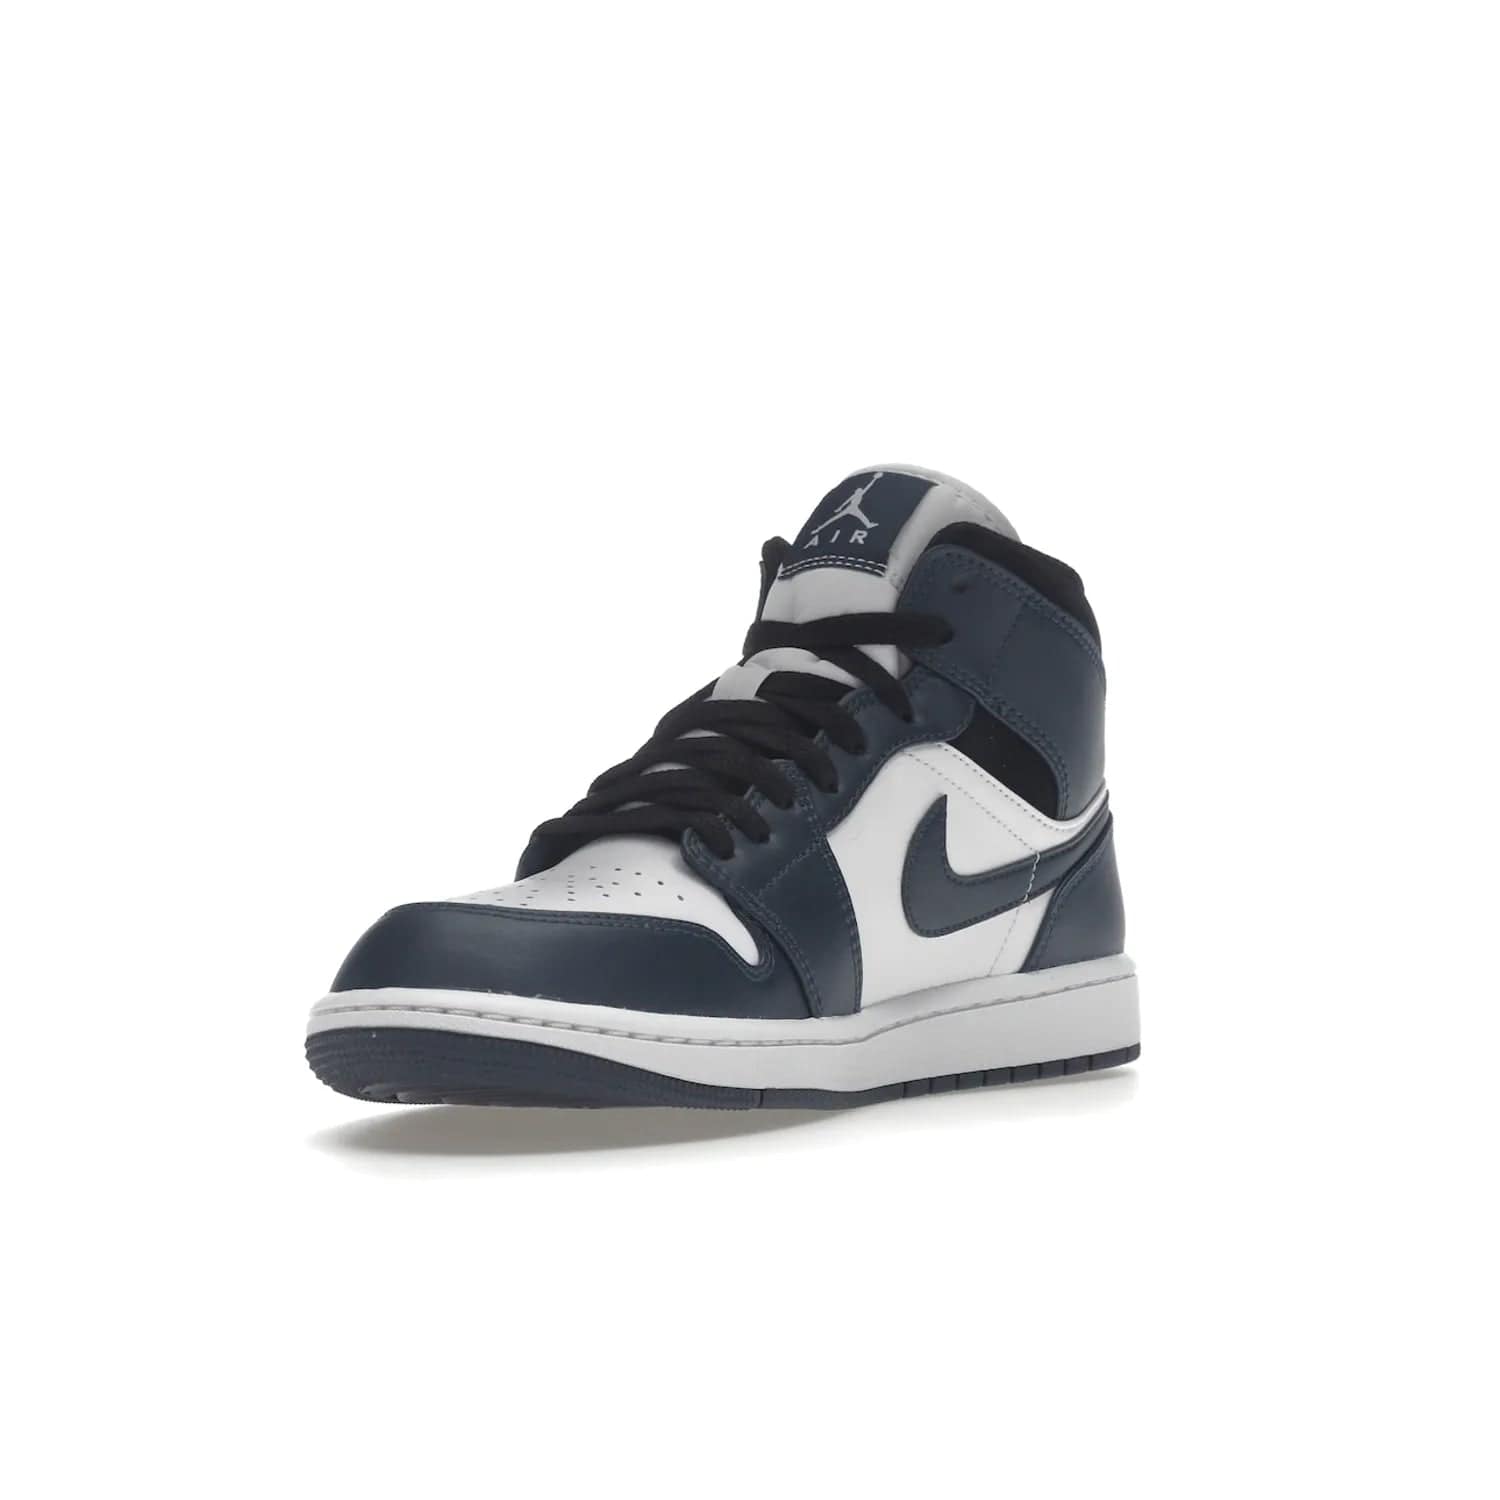 Jordan 1 Mid Armory Navy - Image 14 - Only at www.BallersClubKickz.com - The Jordan 1 Mid Armory Navy: classic basketball sneaker with soft white leather upper, deep navy blue overlays, and black leather ankle detailing. Iconic style with Jordan Wings logo and Jumpman label.